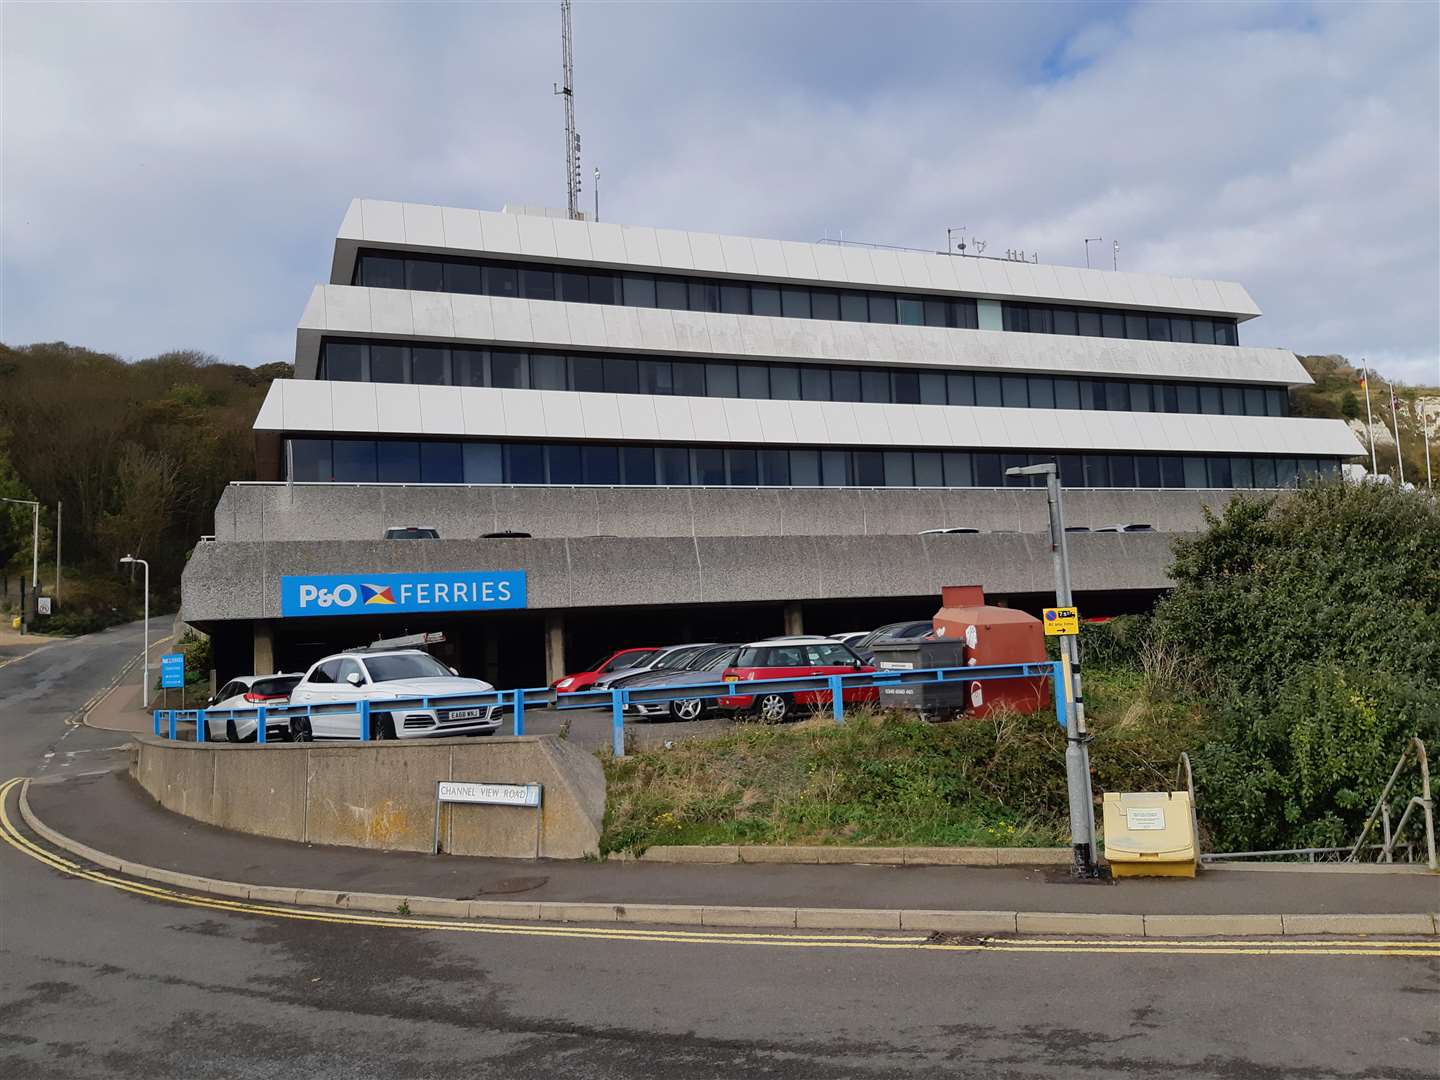 P&0's UK headquarters at Channel View Road, Dover